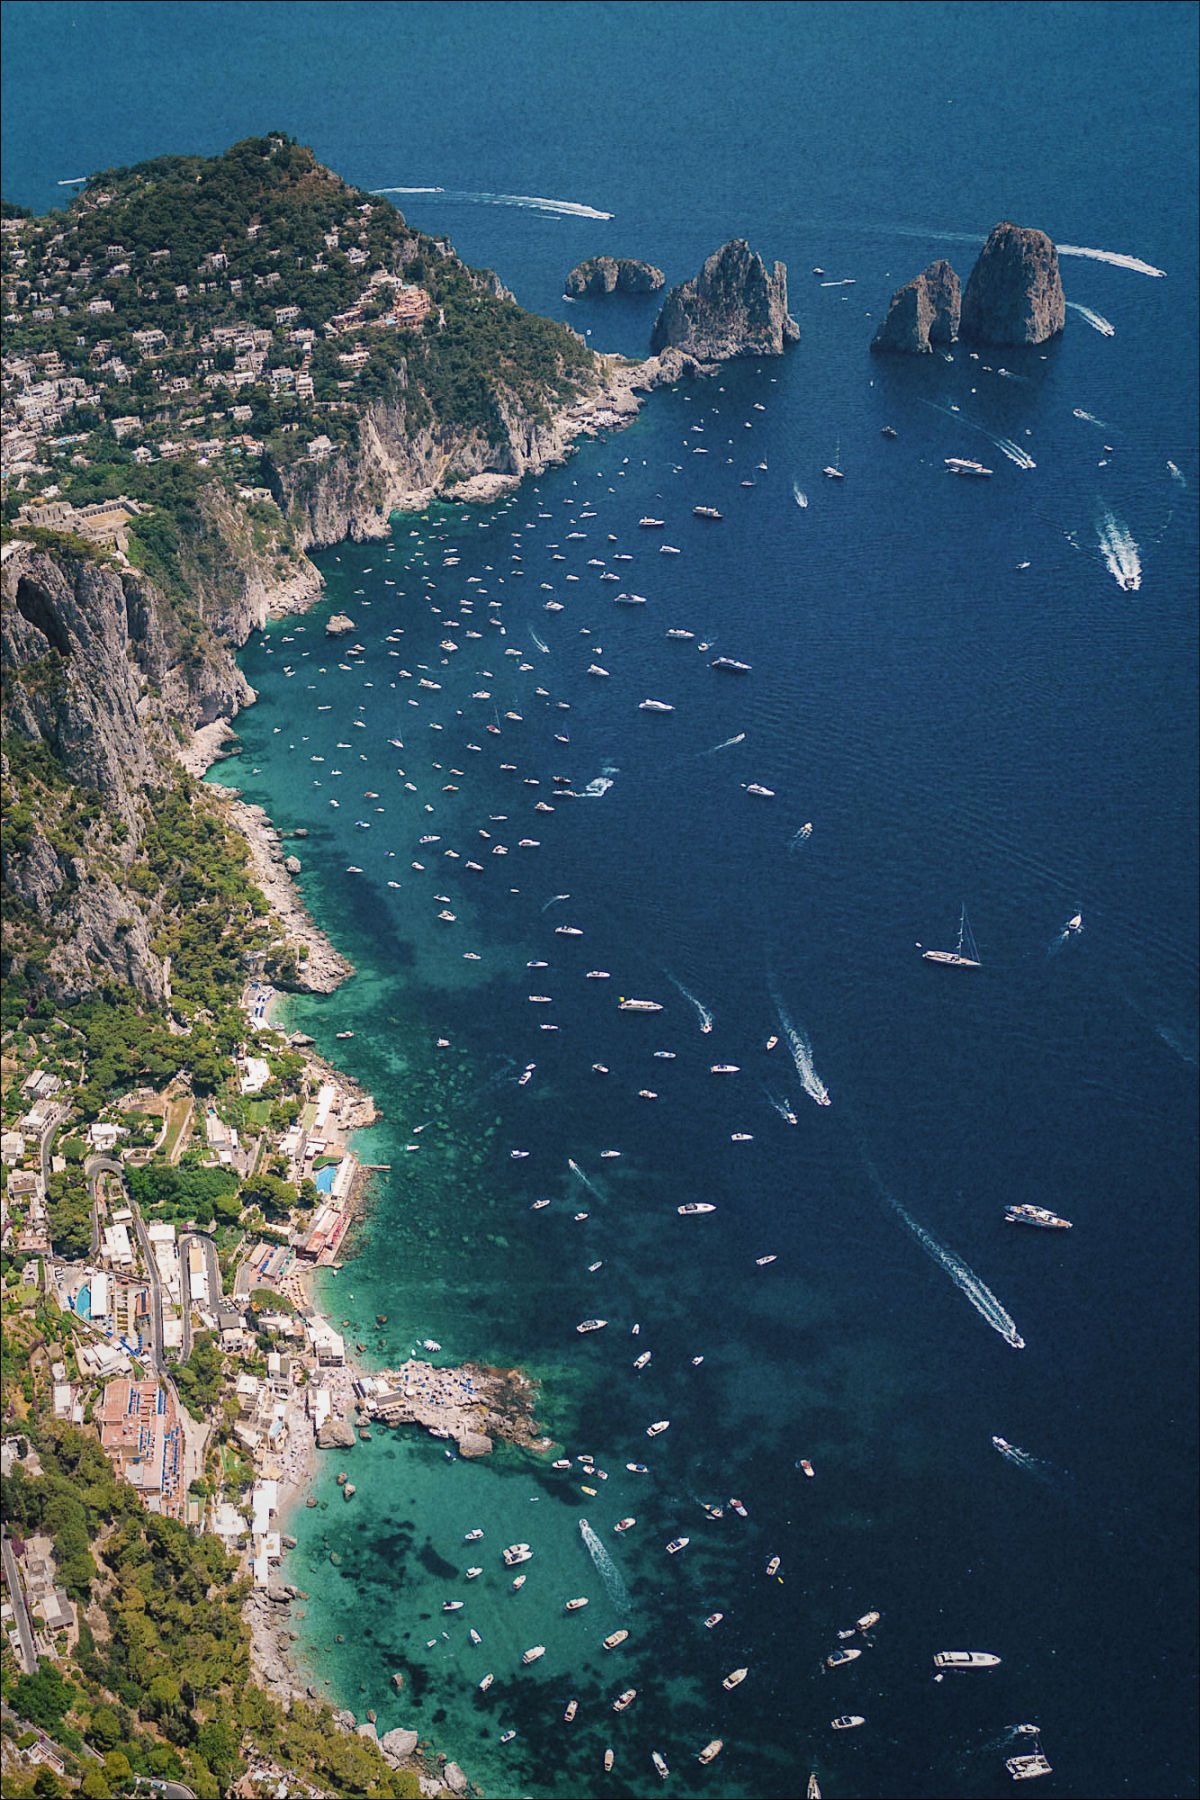 Beautiful views of some of the beaches in Capri in Marina Piccola with views of the Faraglioni